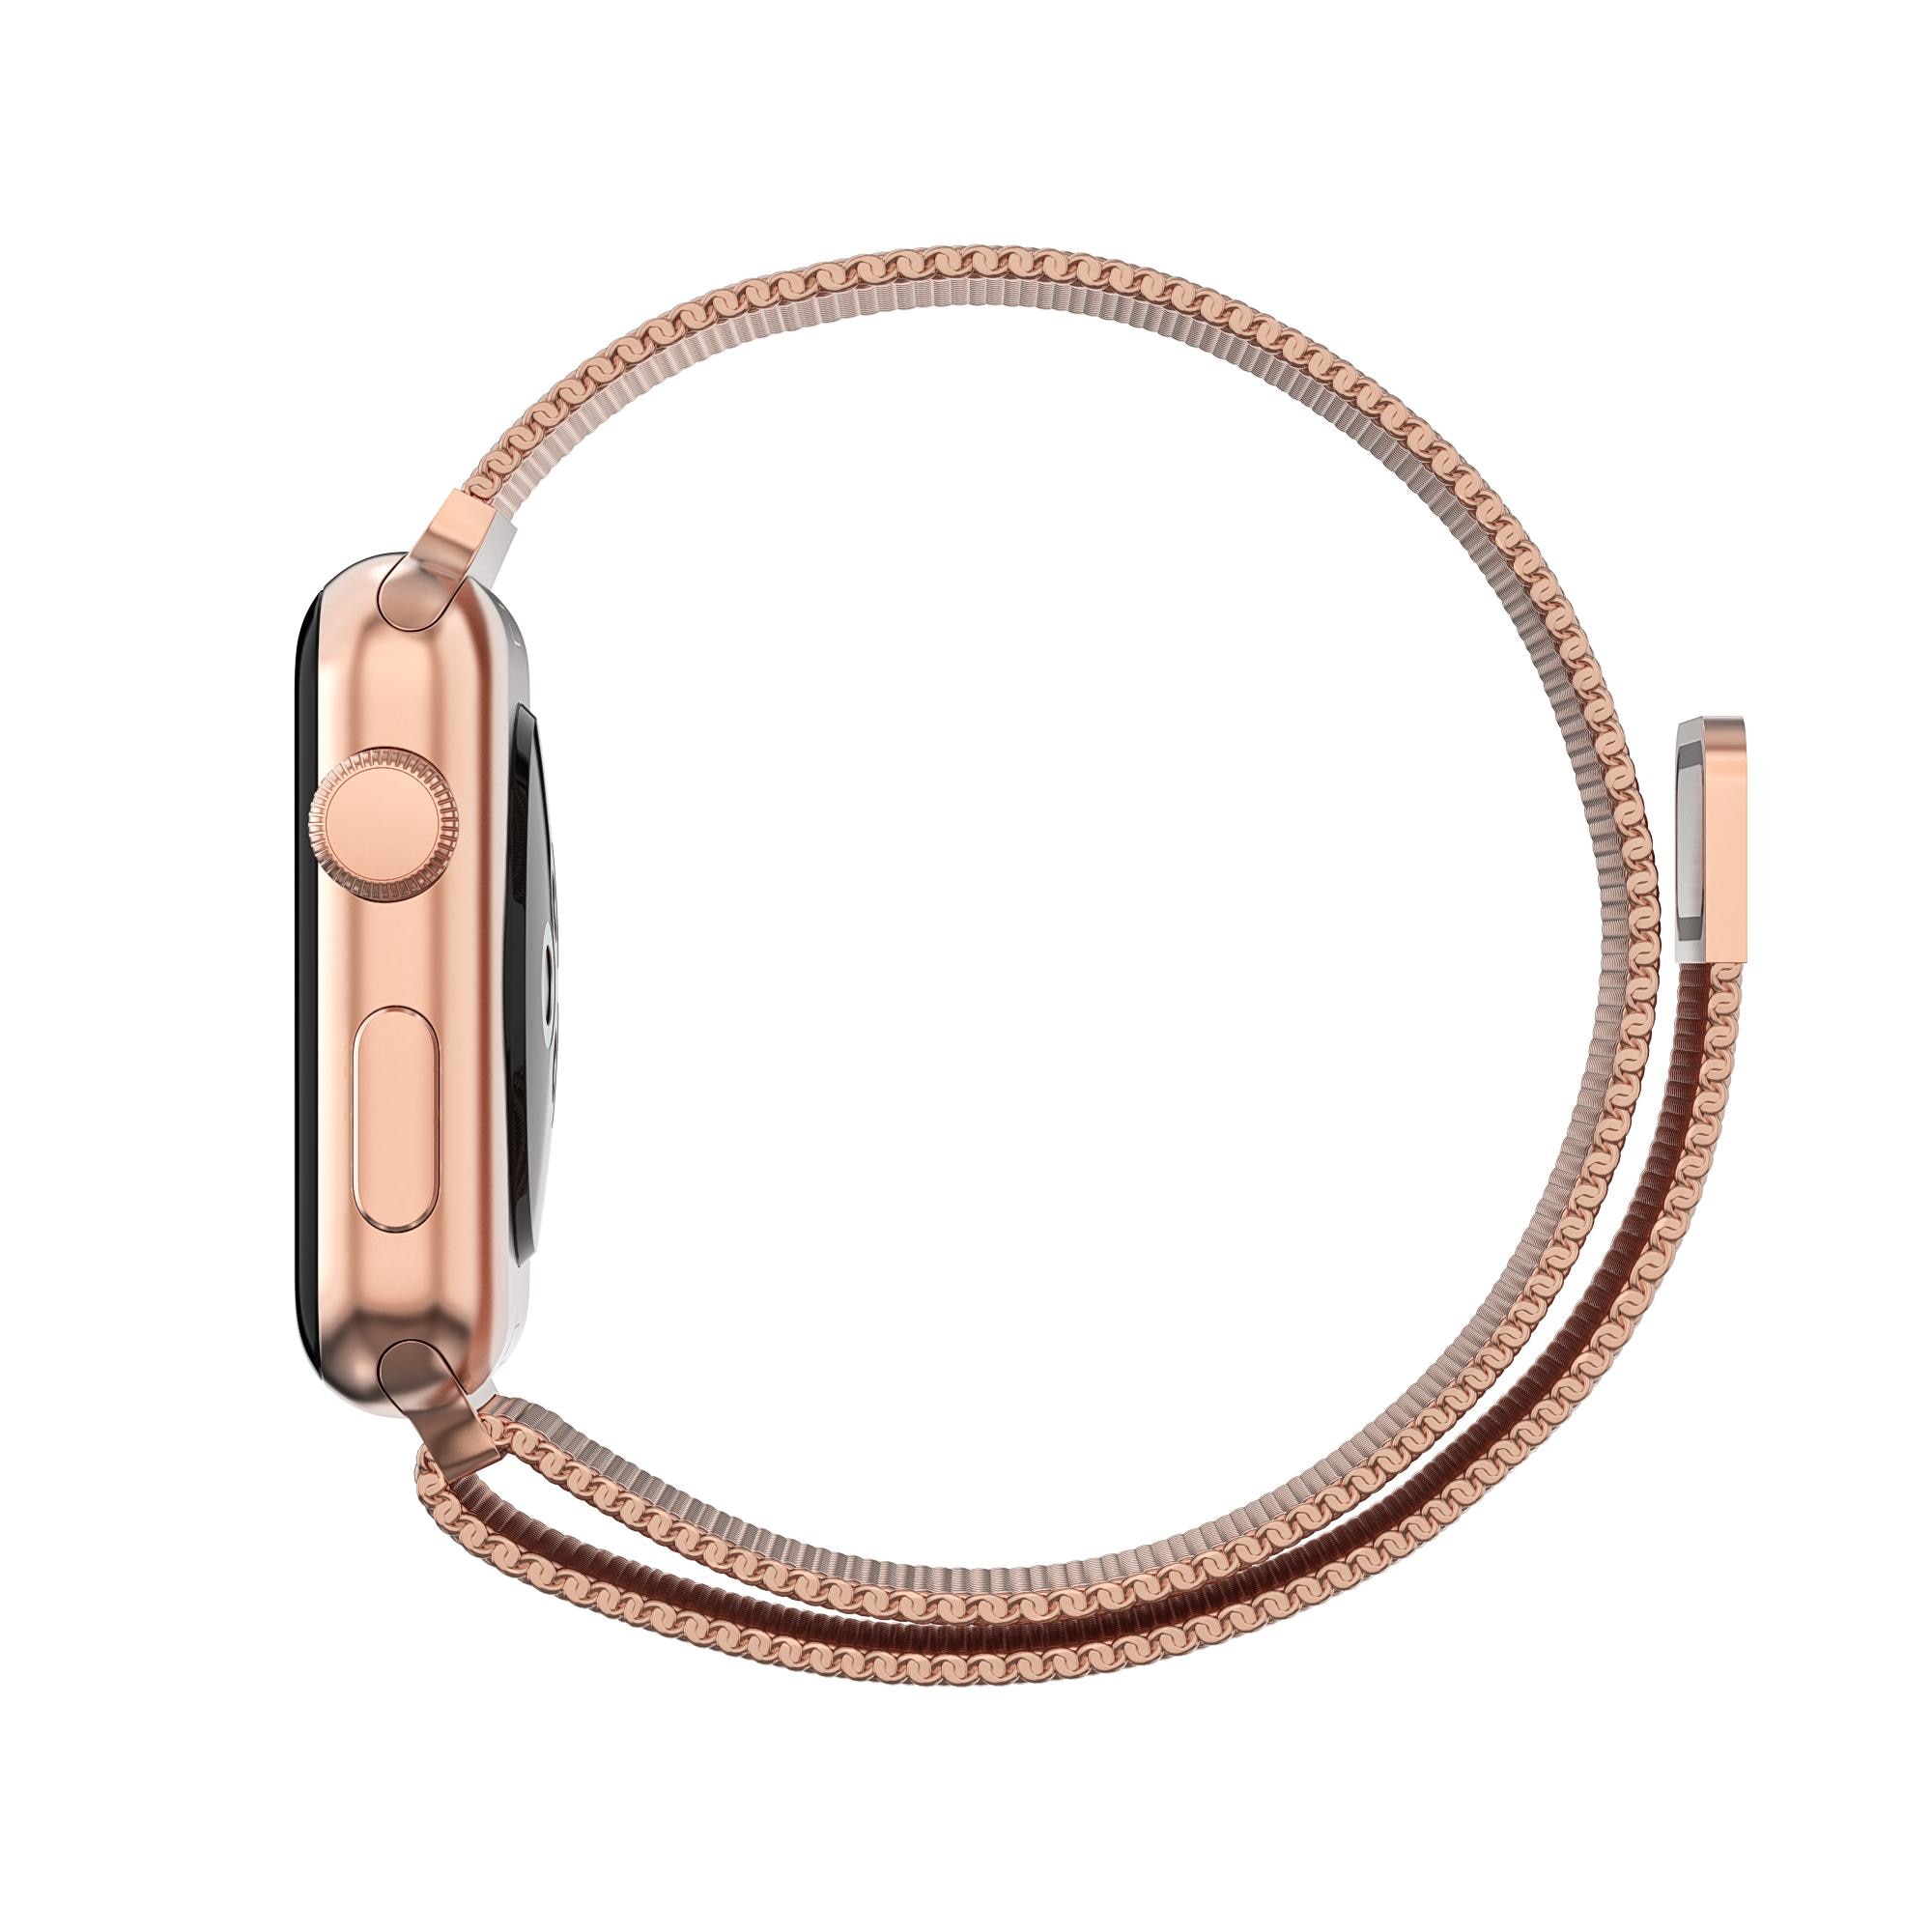 Apple Watch 42mm Milanese Loop Band Rose Gold